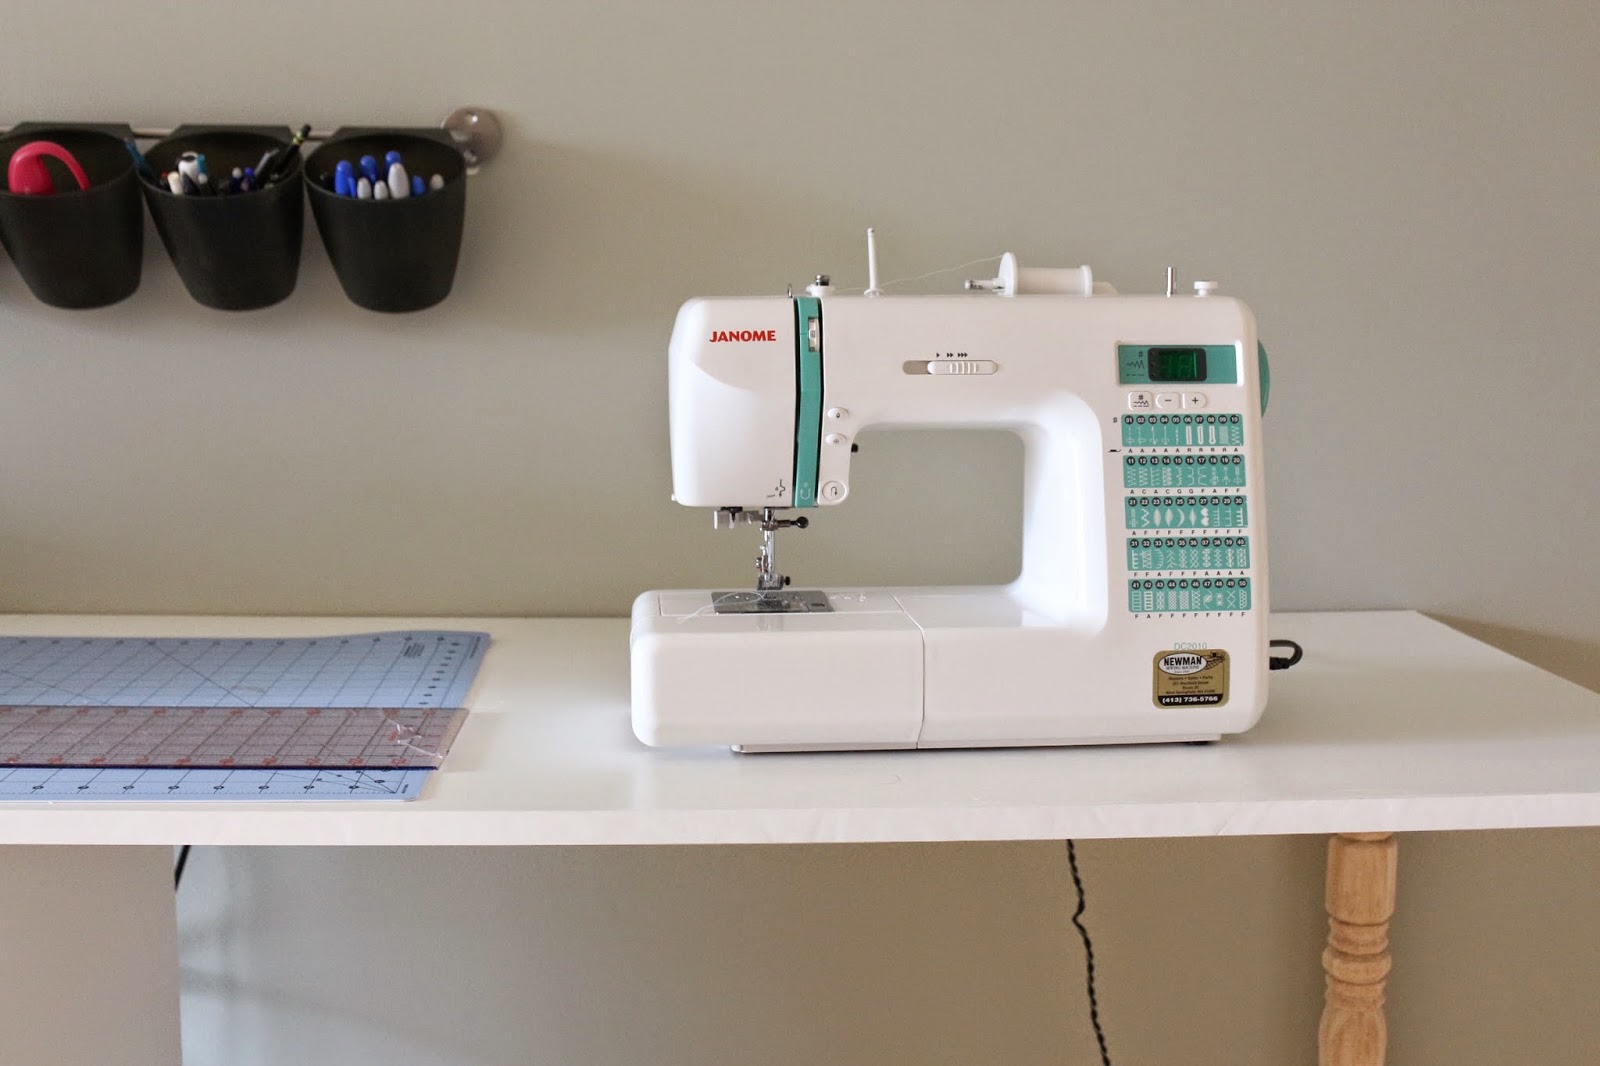 Zaaberry DIY IKEA Knockoff Sewing Table